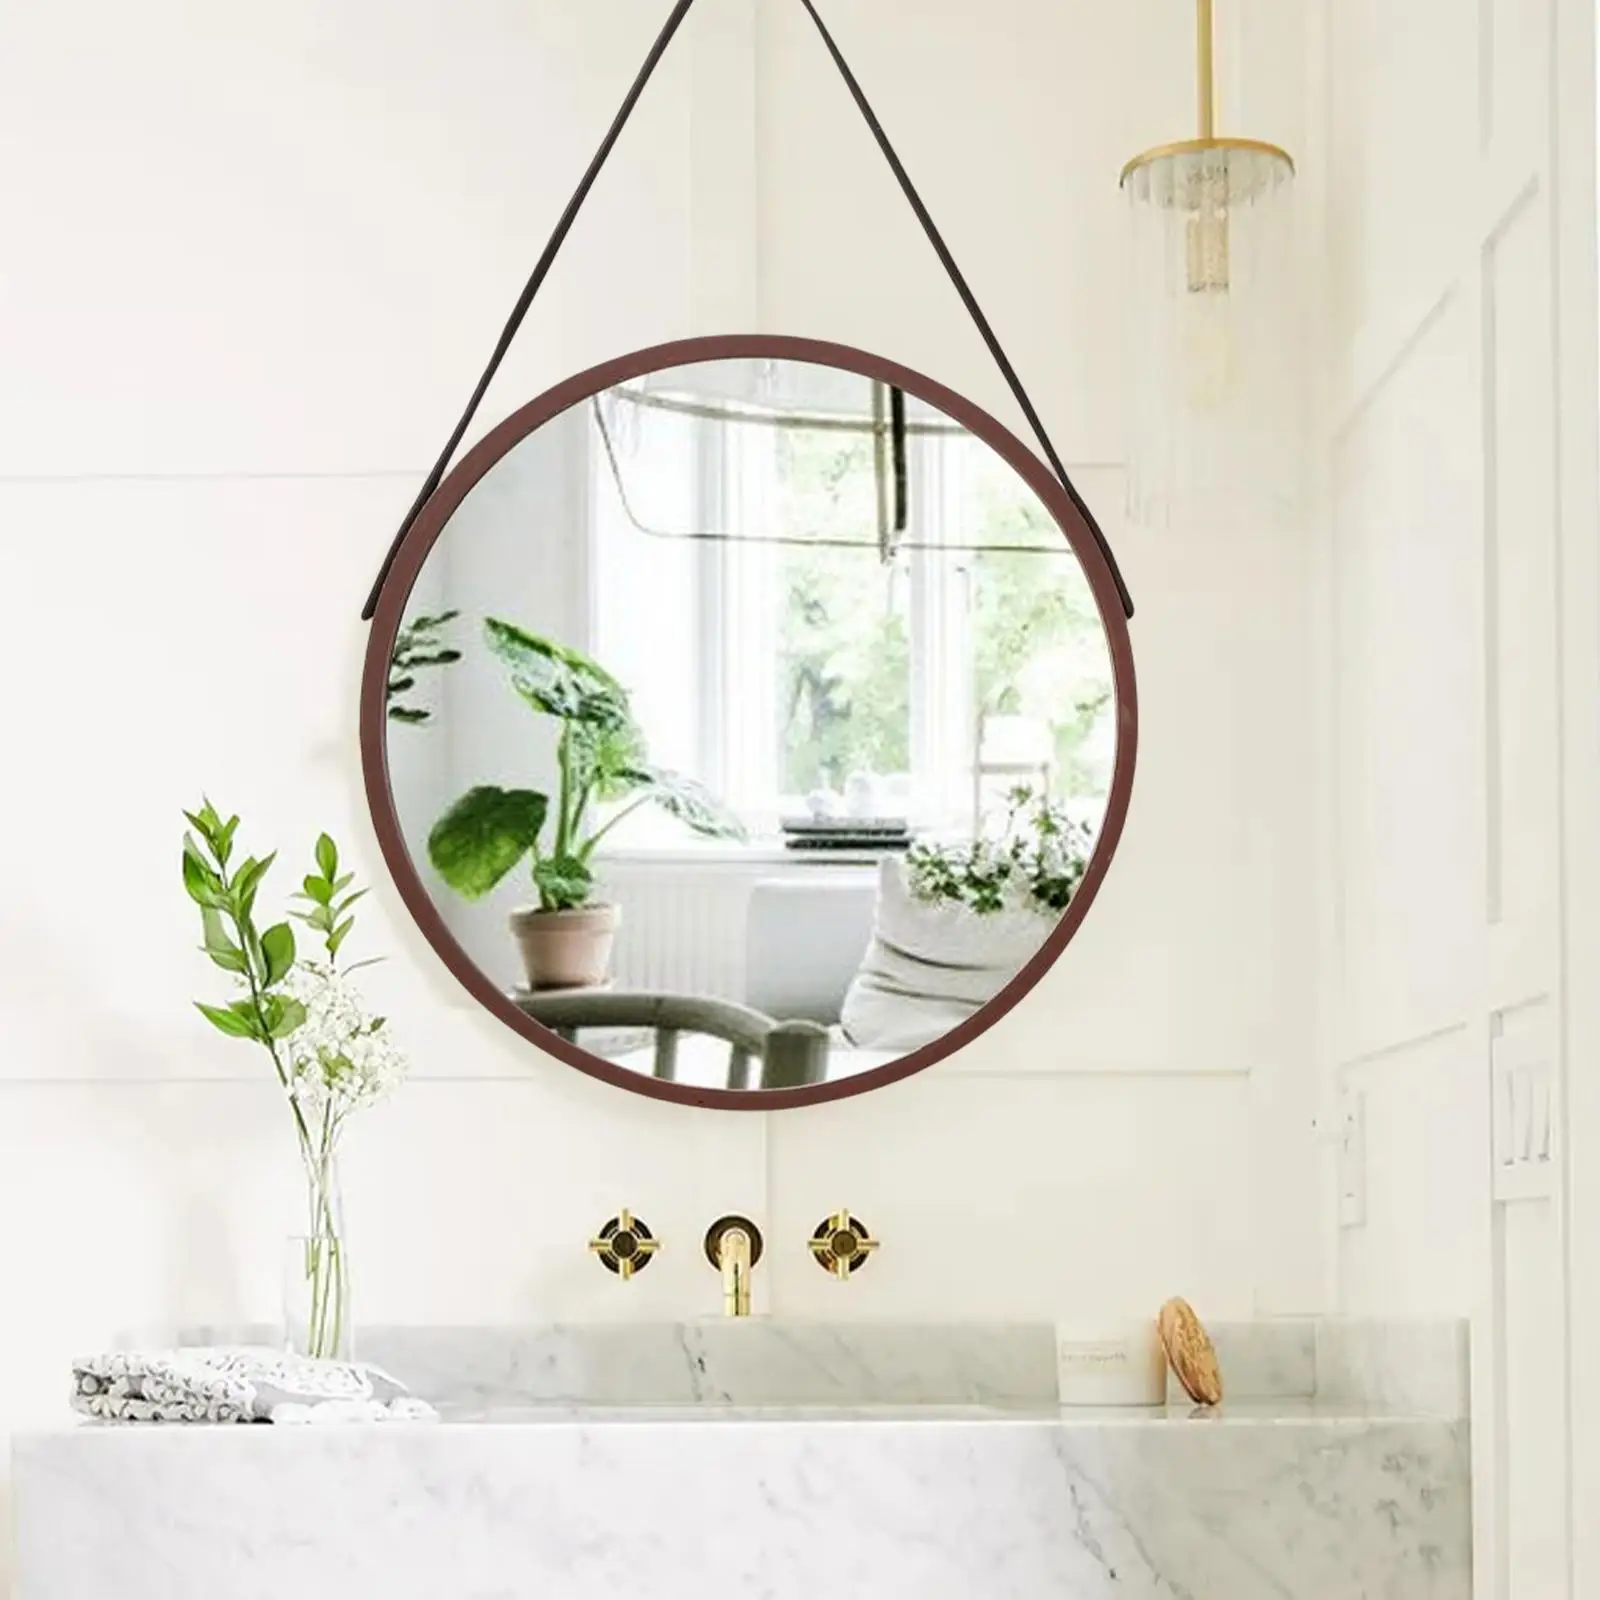 Hanging Mirror Makeup Mirror Wall Mounted Wood Framed Ornament Circle  for Salon Toilet Dorm Farmhouse Decorative